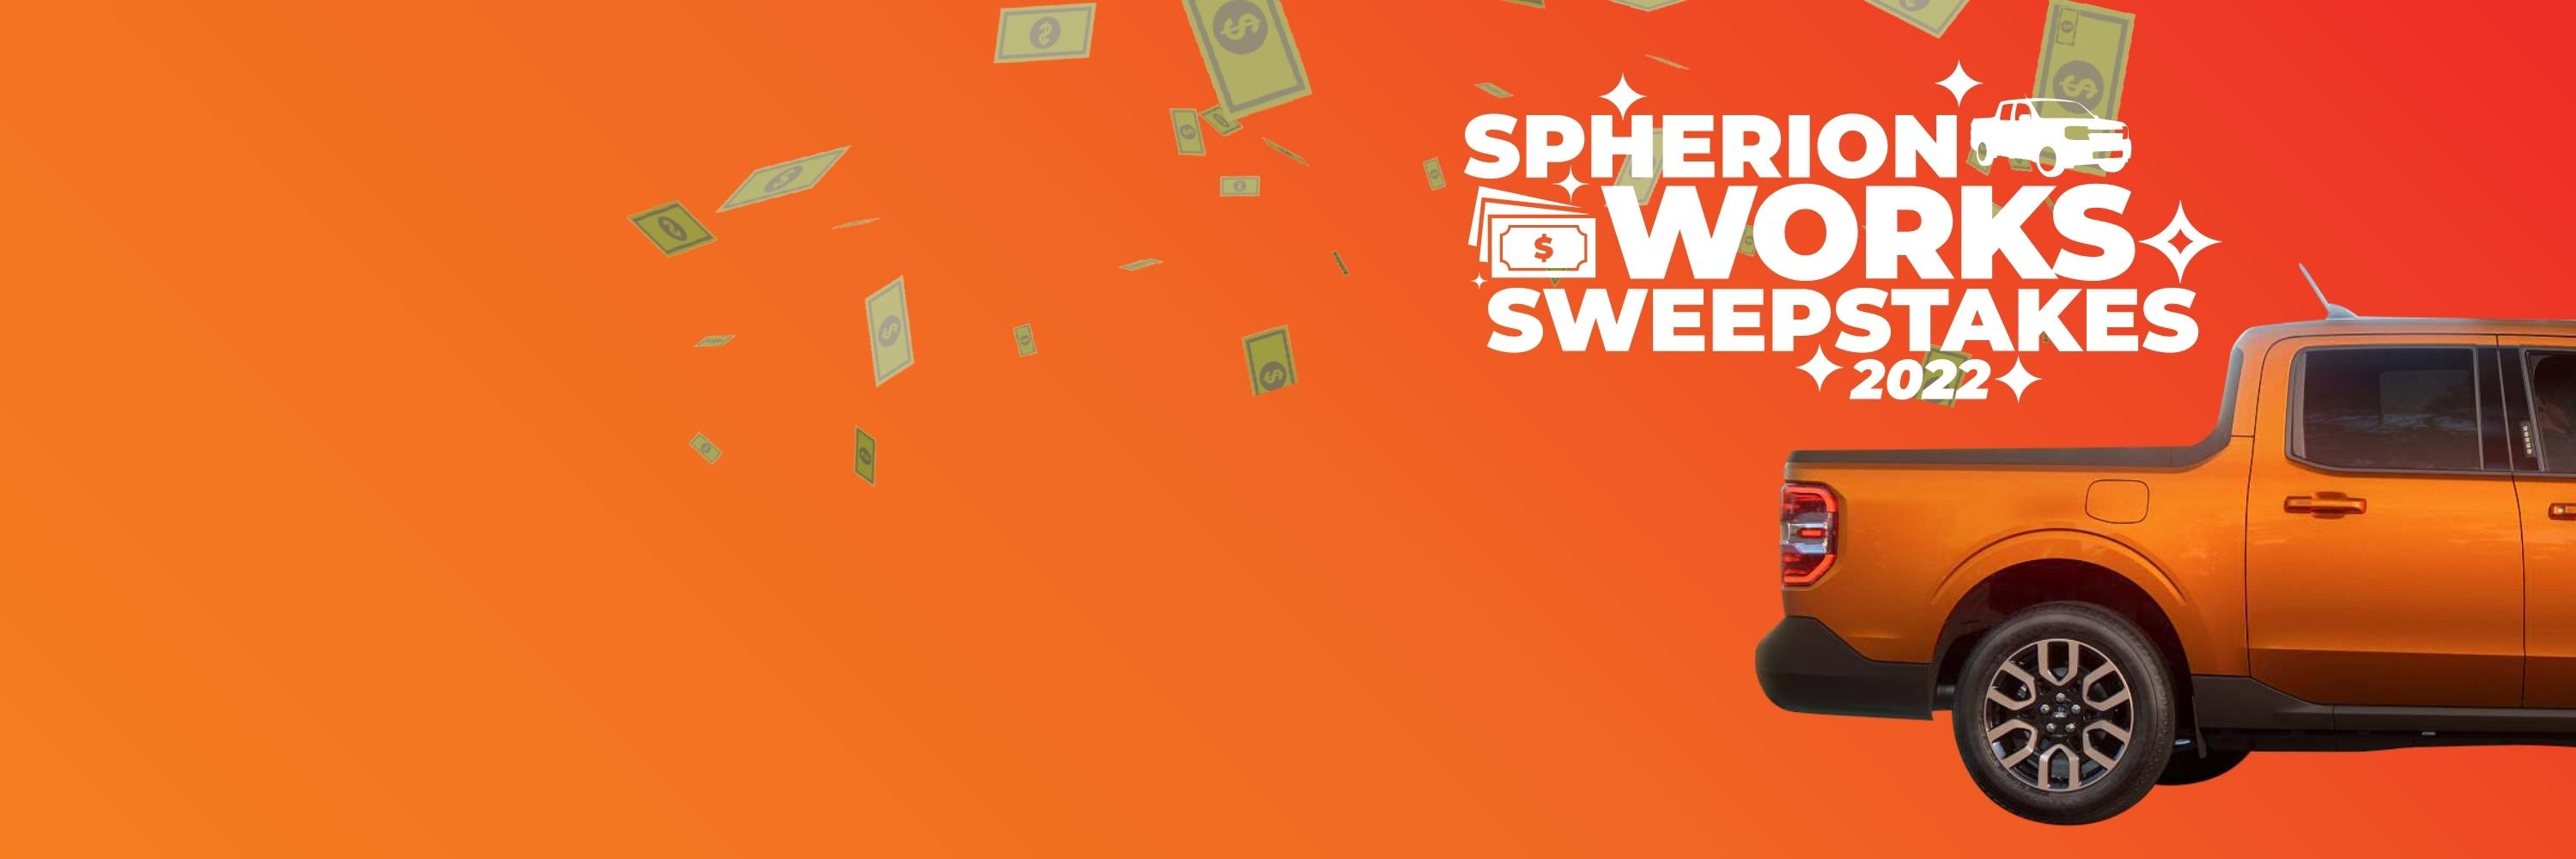 Orange truck driving off the right side of the image with green cash flowing out of the back and Spherion Works Sweepstakes logo